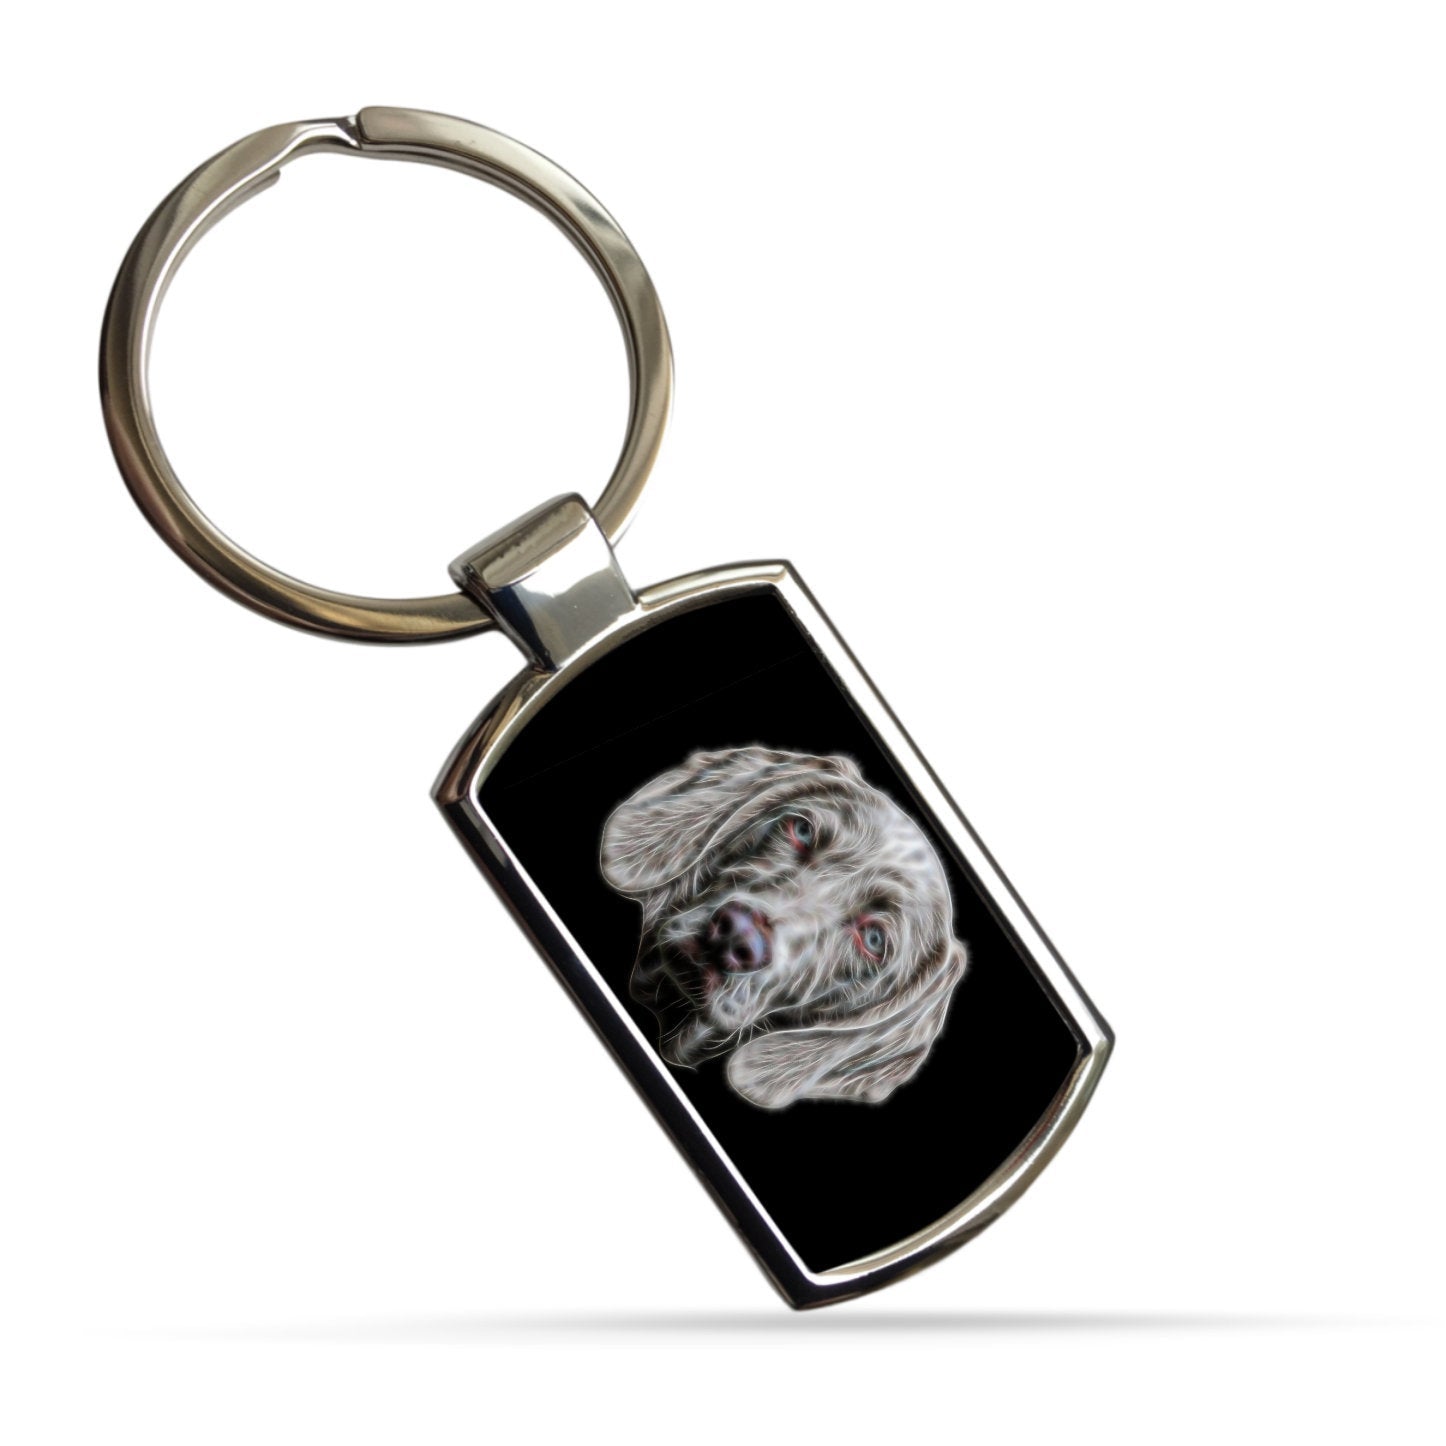 Weimaraner Keychain with Stunning Fractal Art Design. A Perfect Gift for Dog Lover.